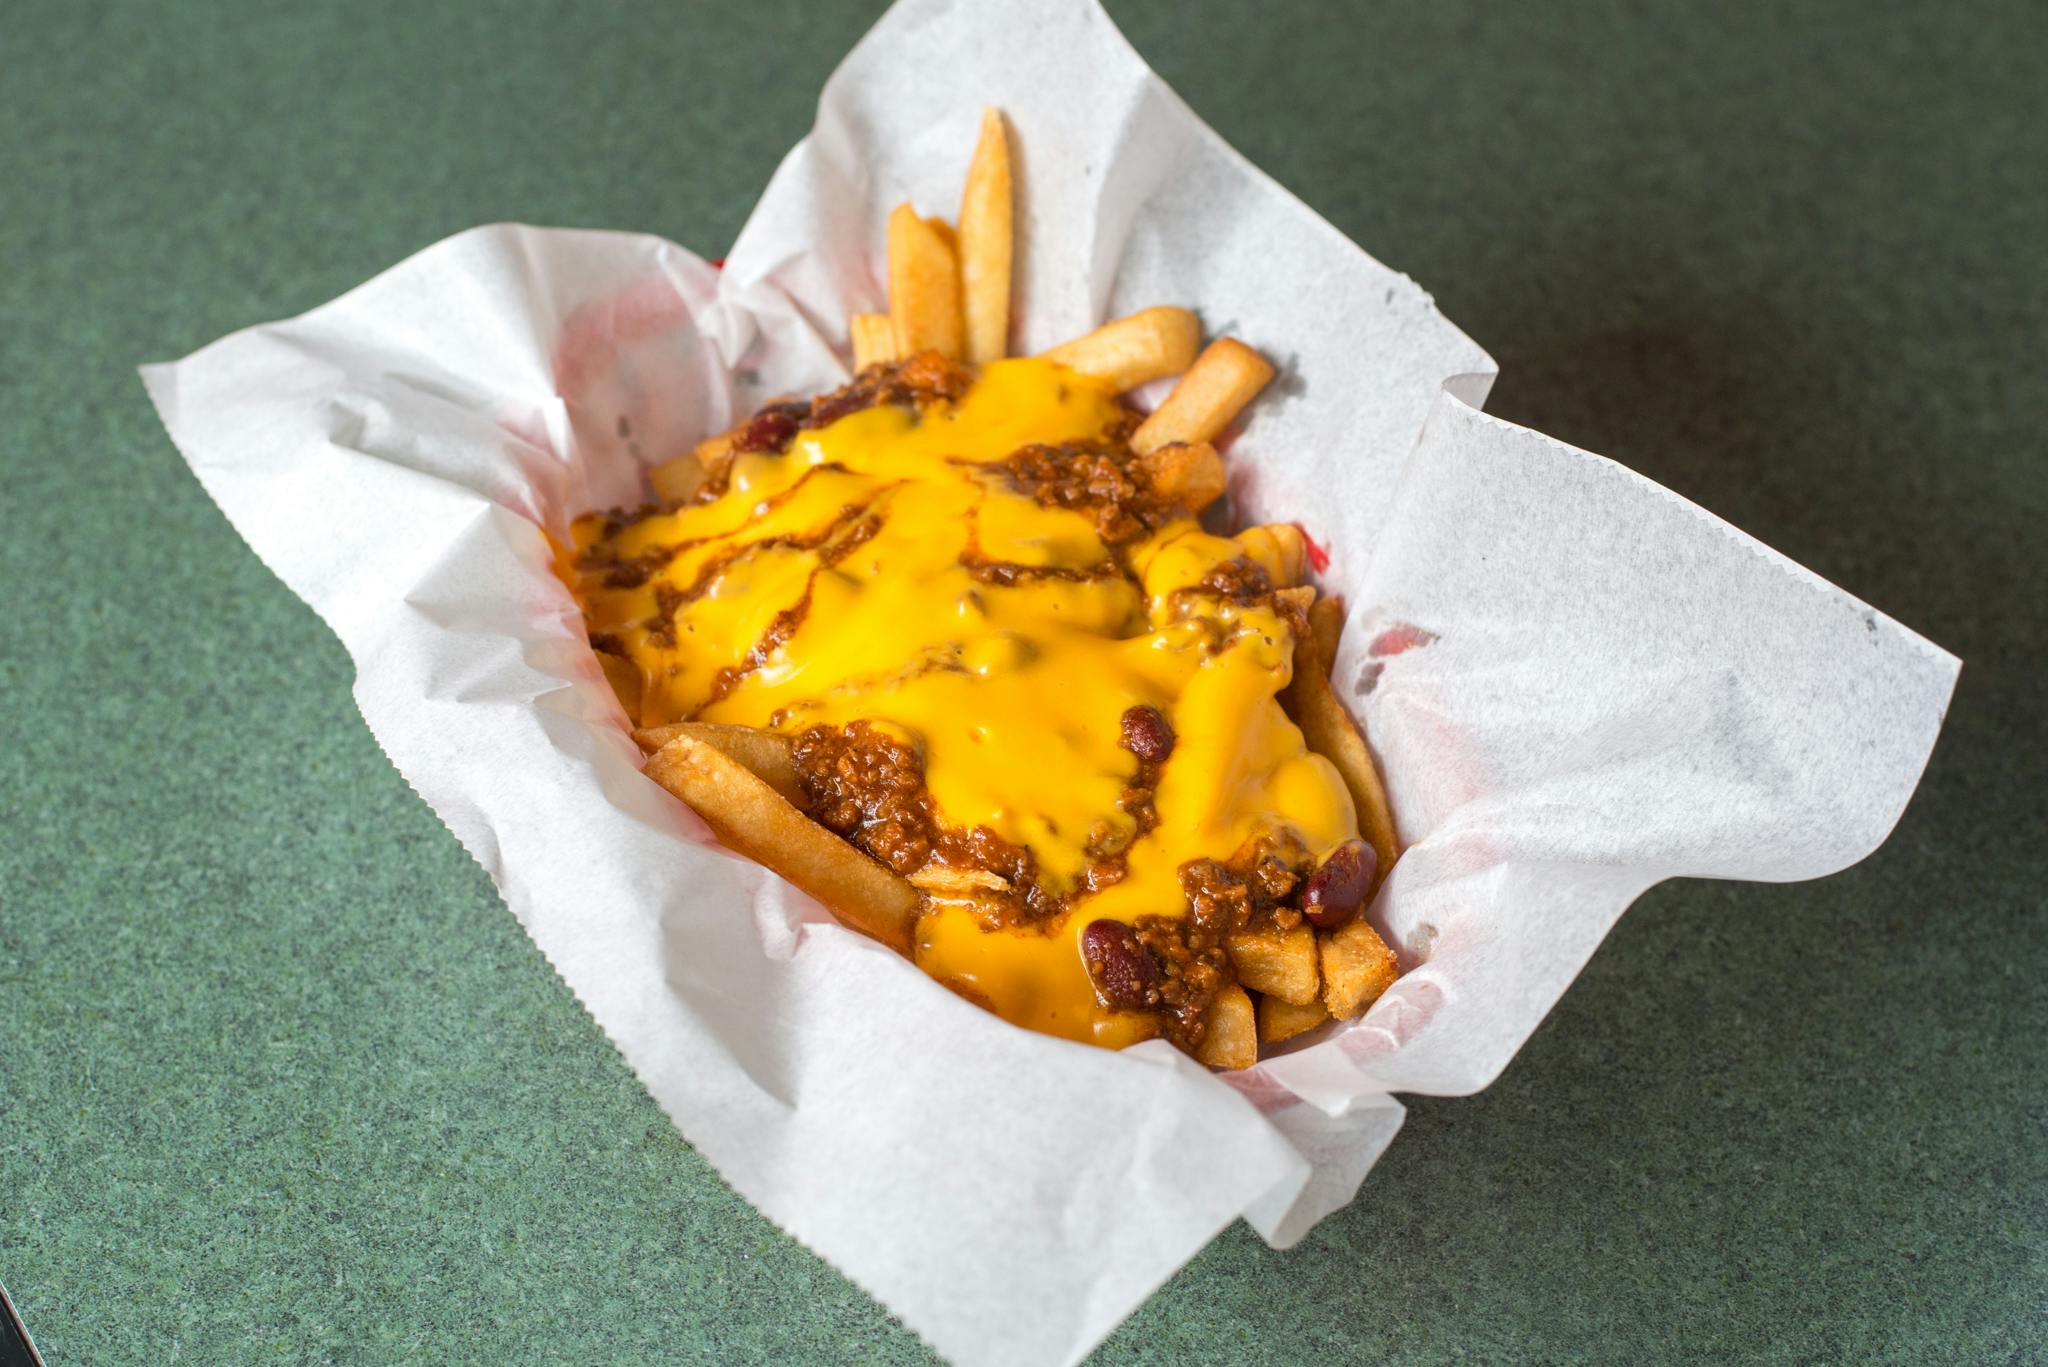 Chili Cheese Fries from Kentro Gyros in Green Bay, WI